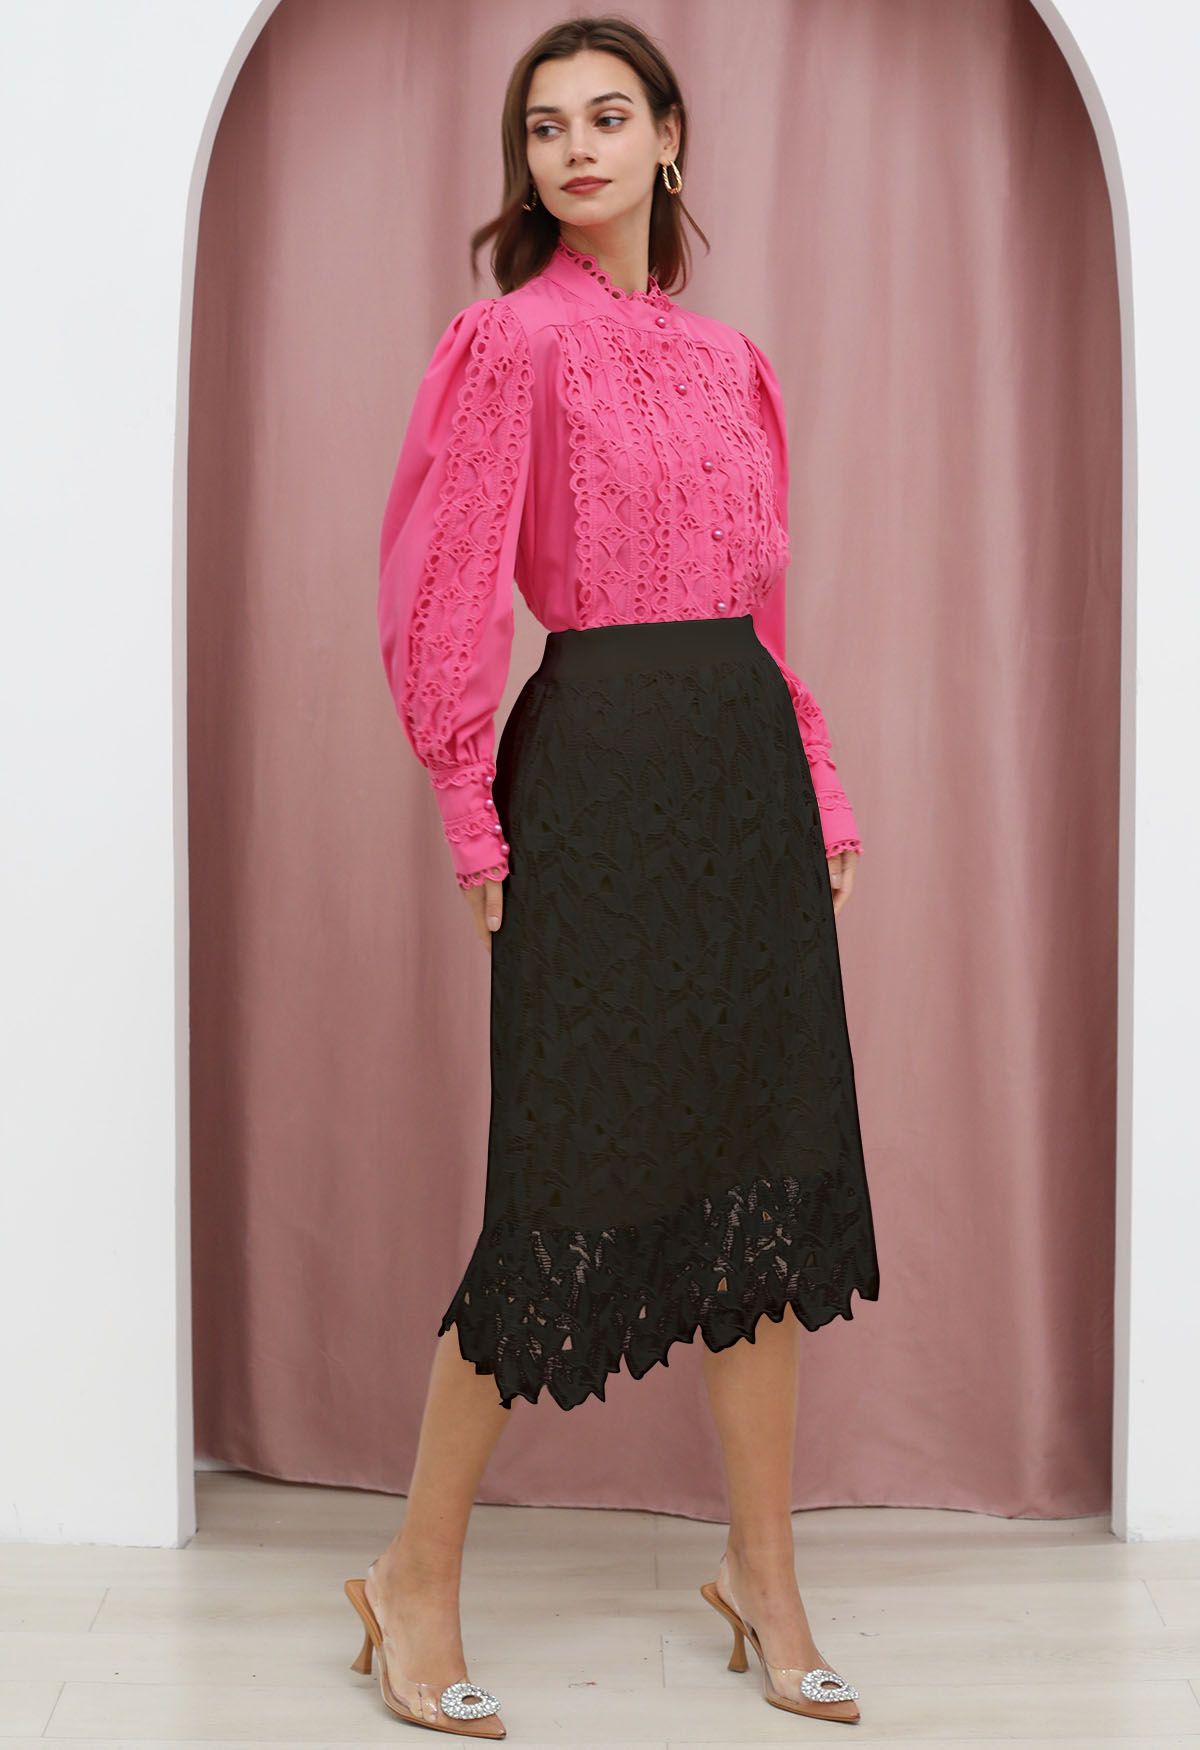 Cutwork Lace Overlay Knit Midi Skirt in Black